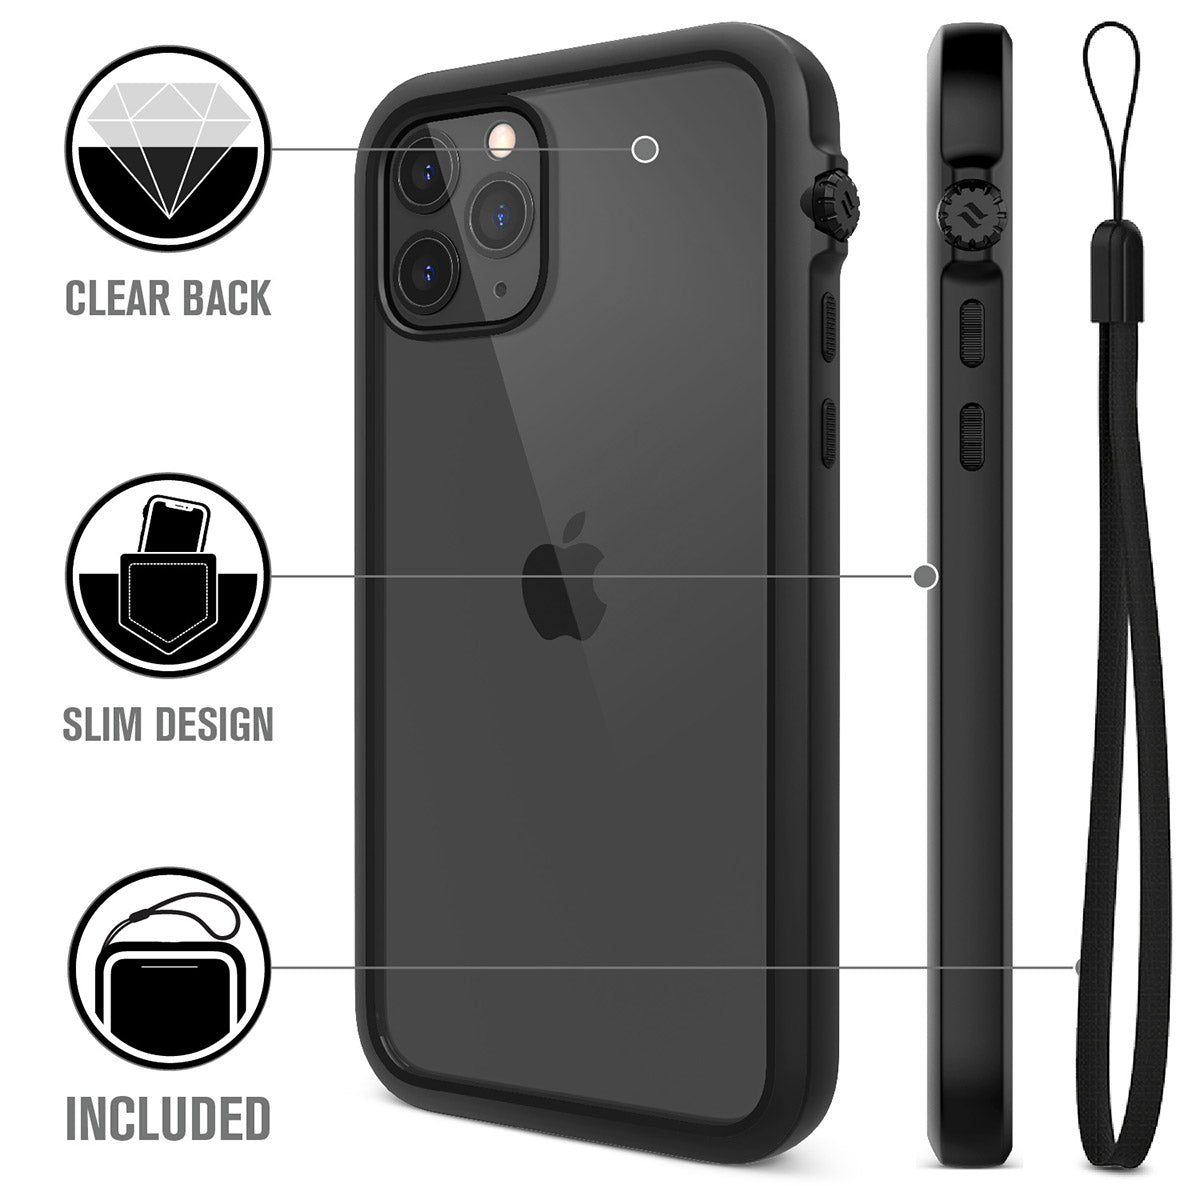 catalyst iPhone 11 series impact protection case black showing the back view and buttons of the case for iPhone 11 pro and a lanyard text reads clear back slim design included